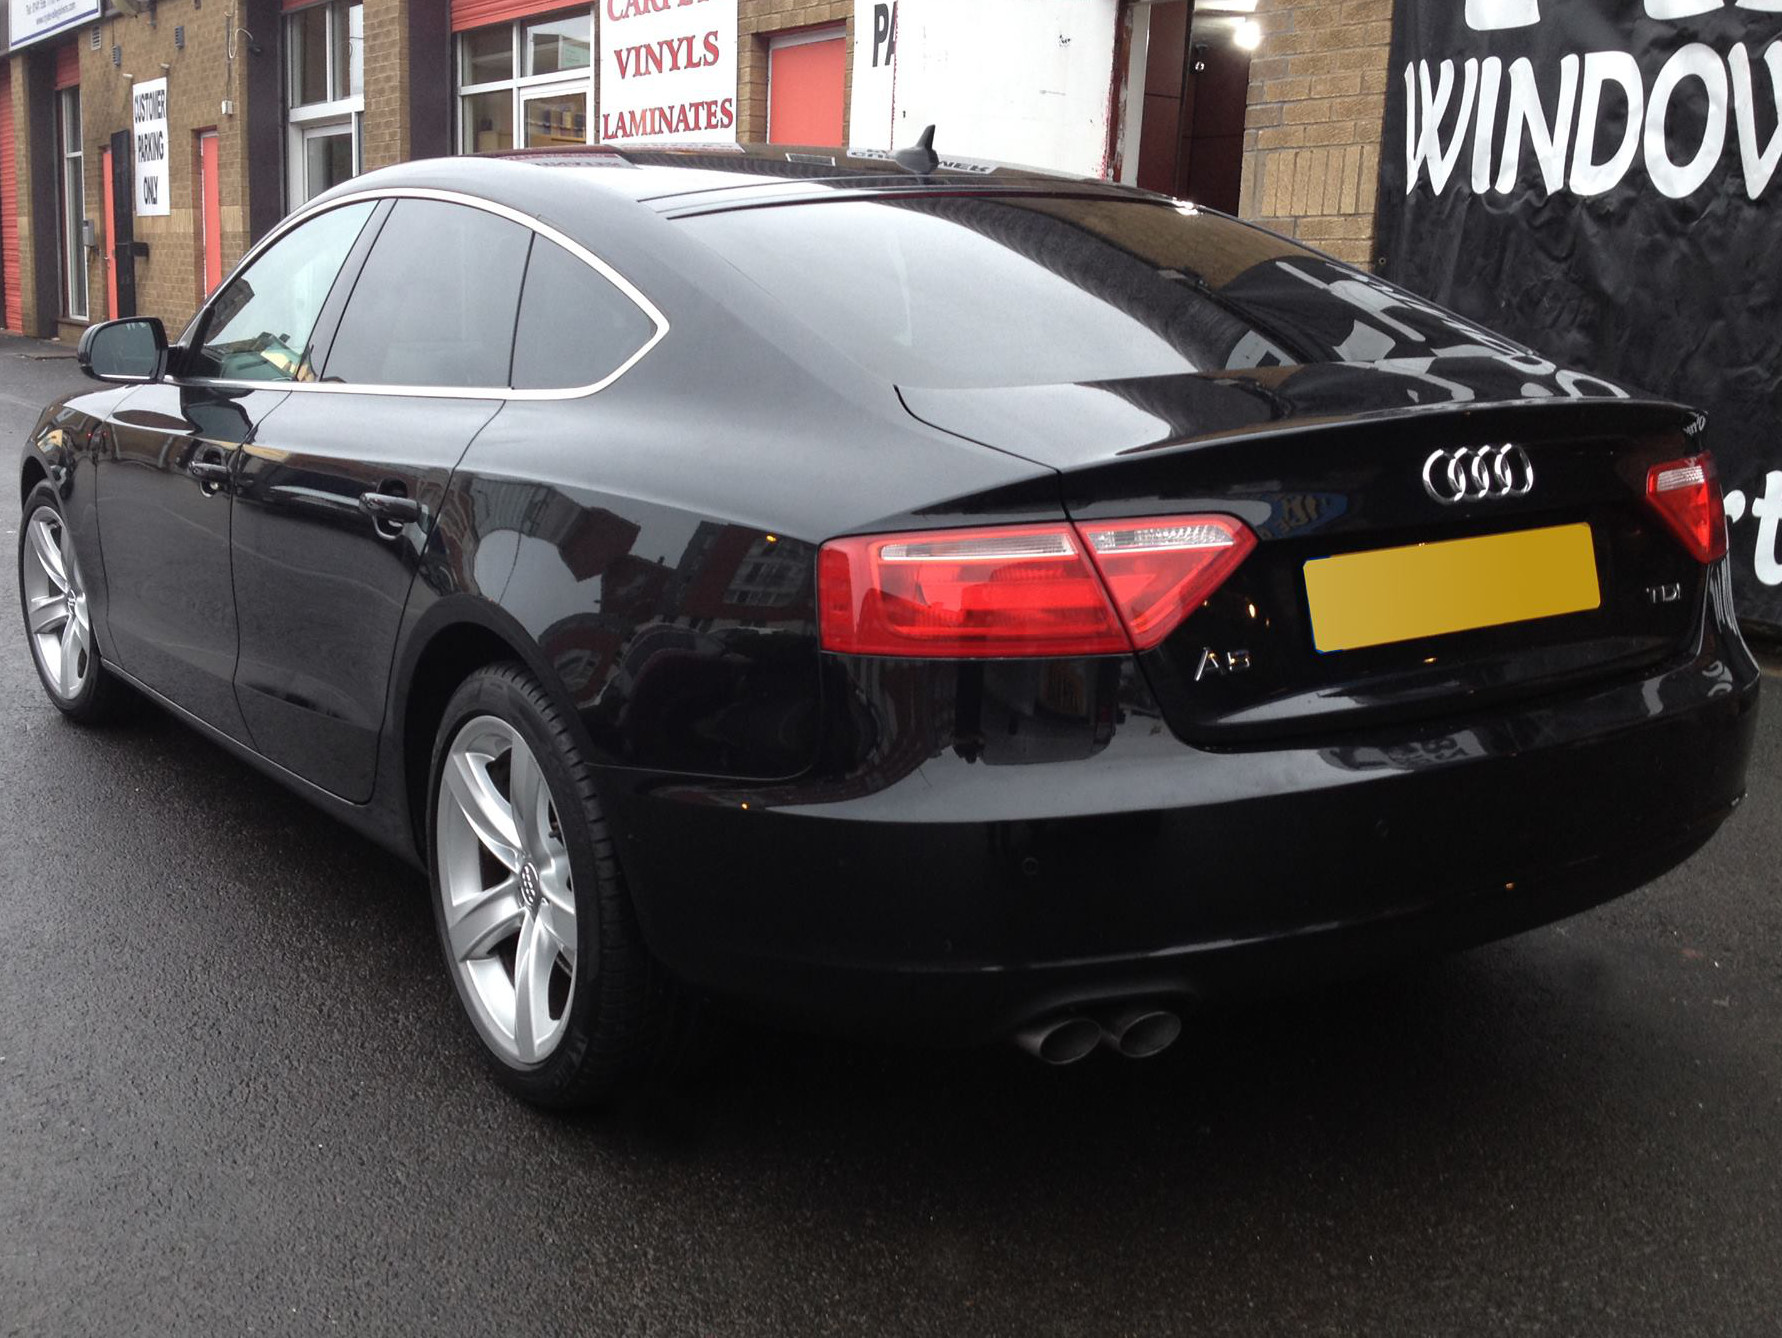 Car window tints fitted on an Audi A5 Sporthatch